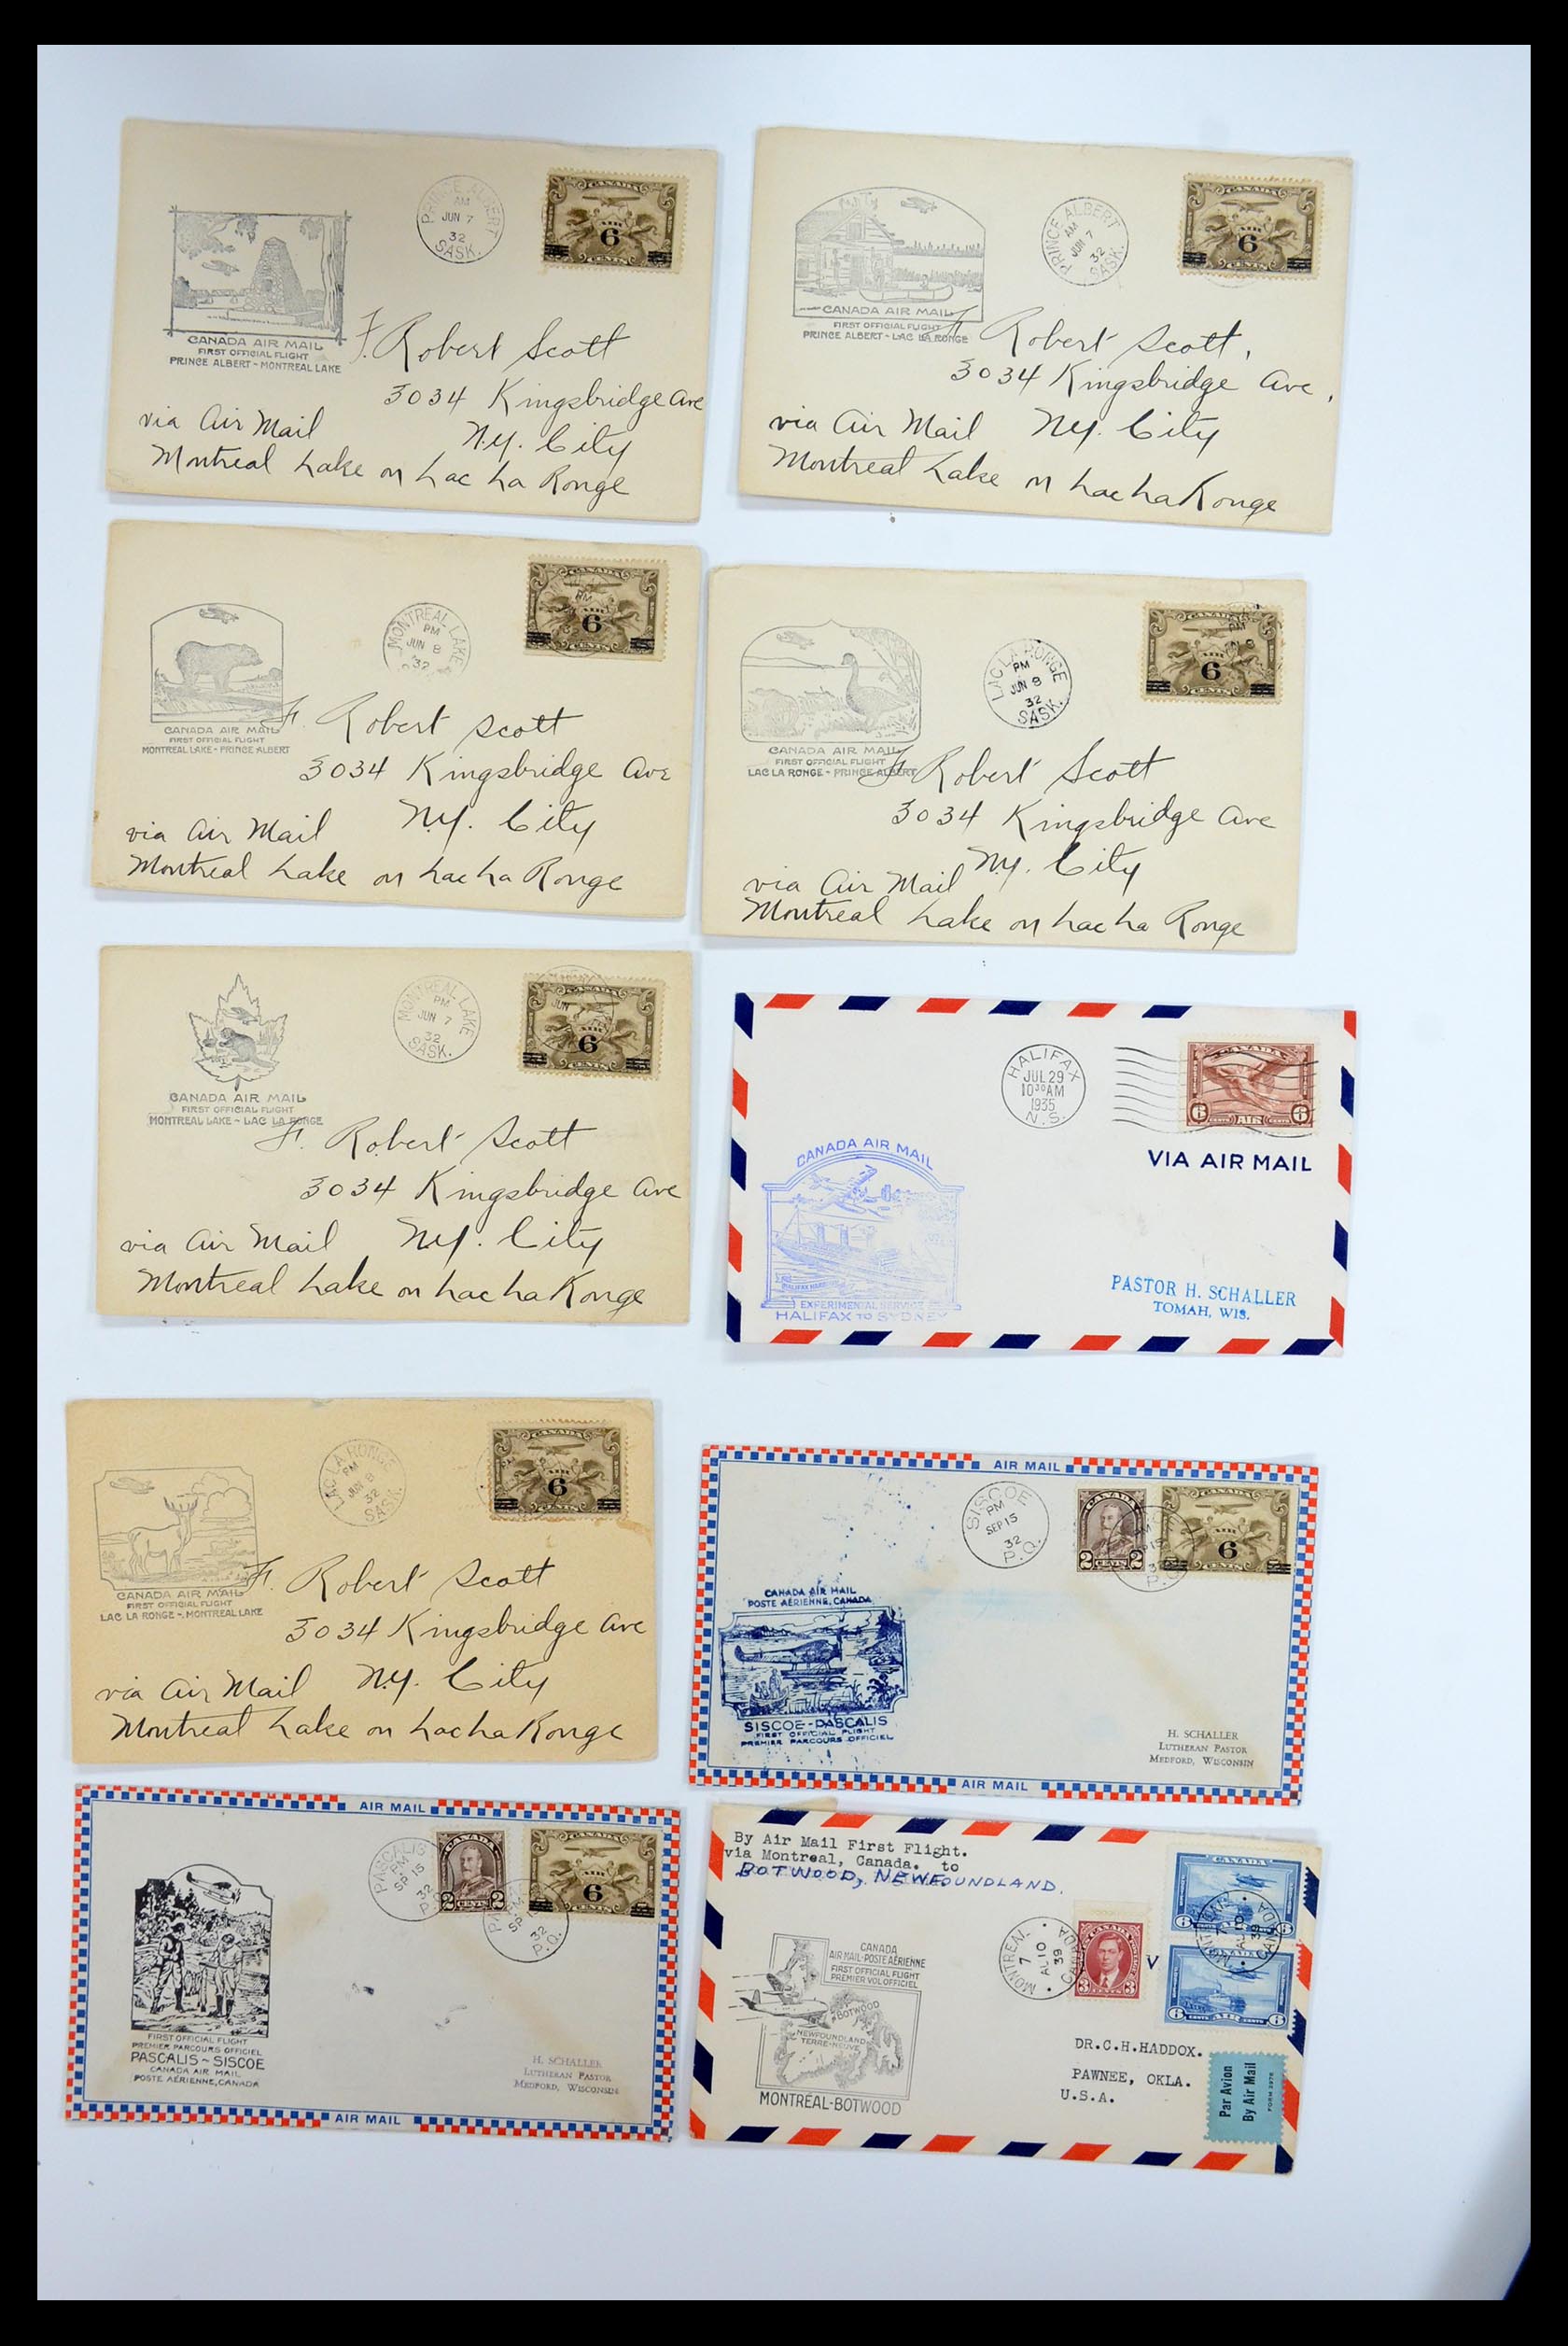 35338 350 - Stamp Collection 35338 Canada airmail covers 1927-1950.